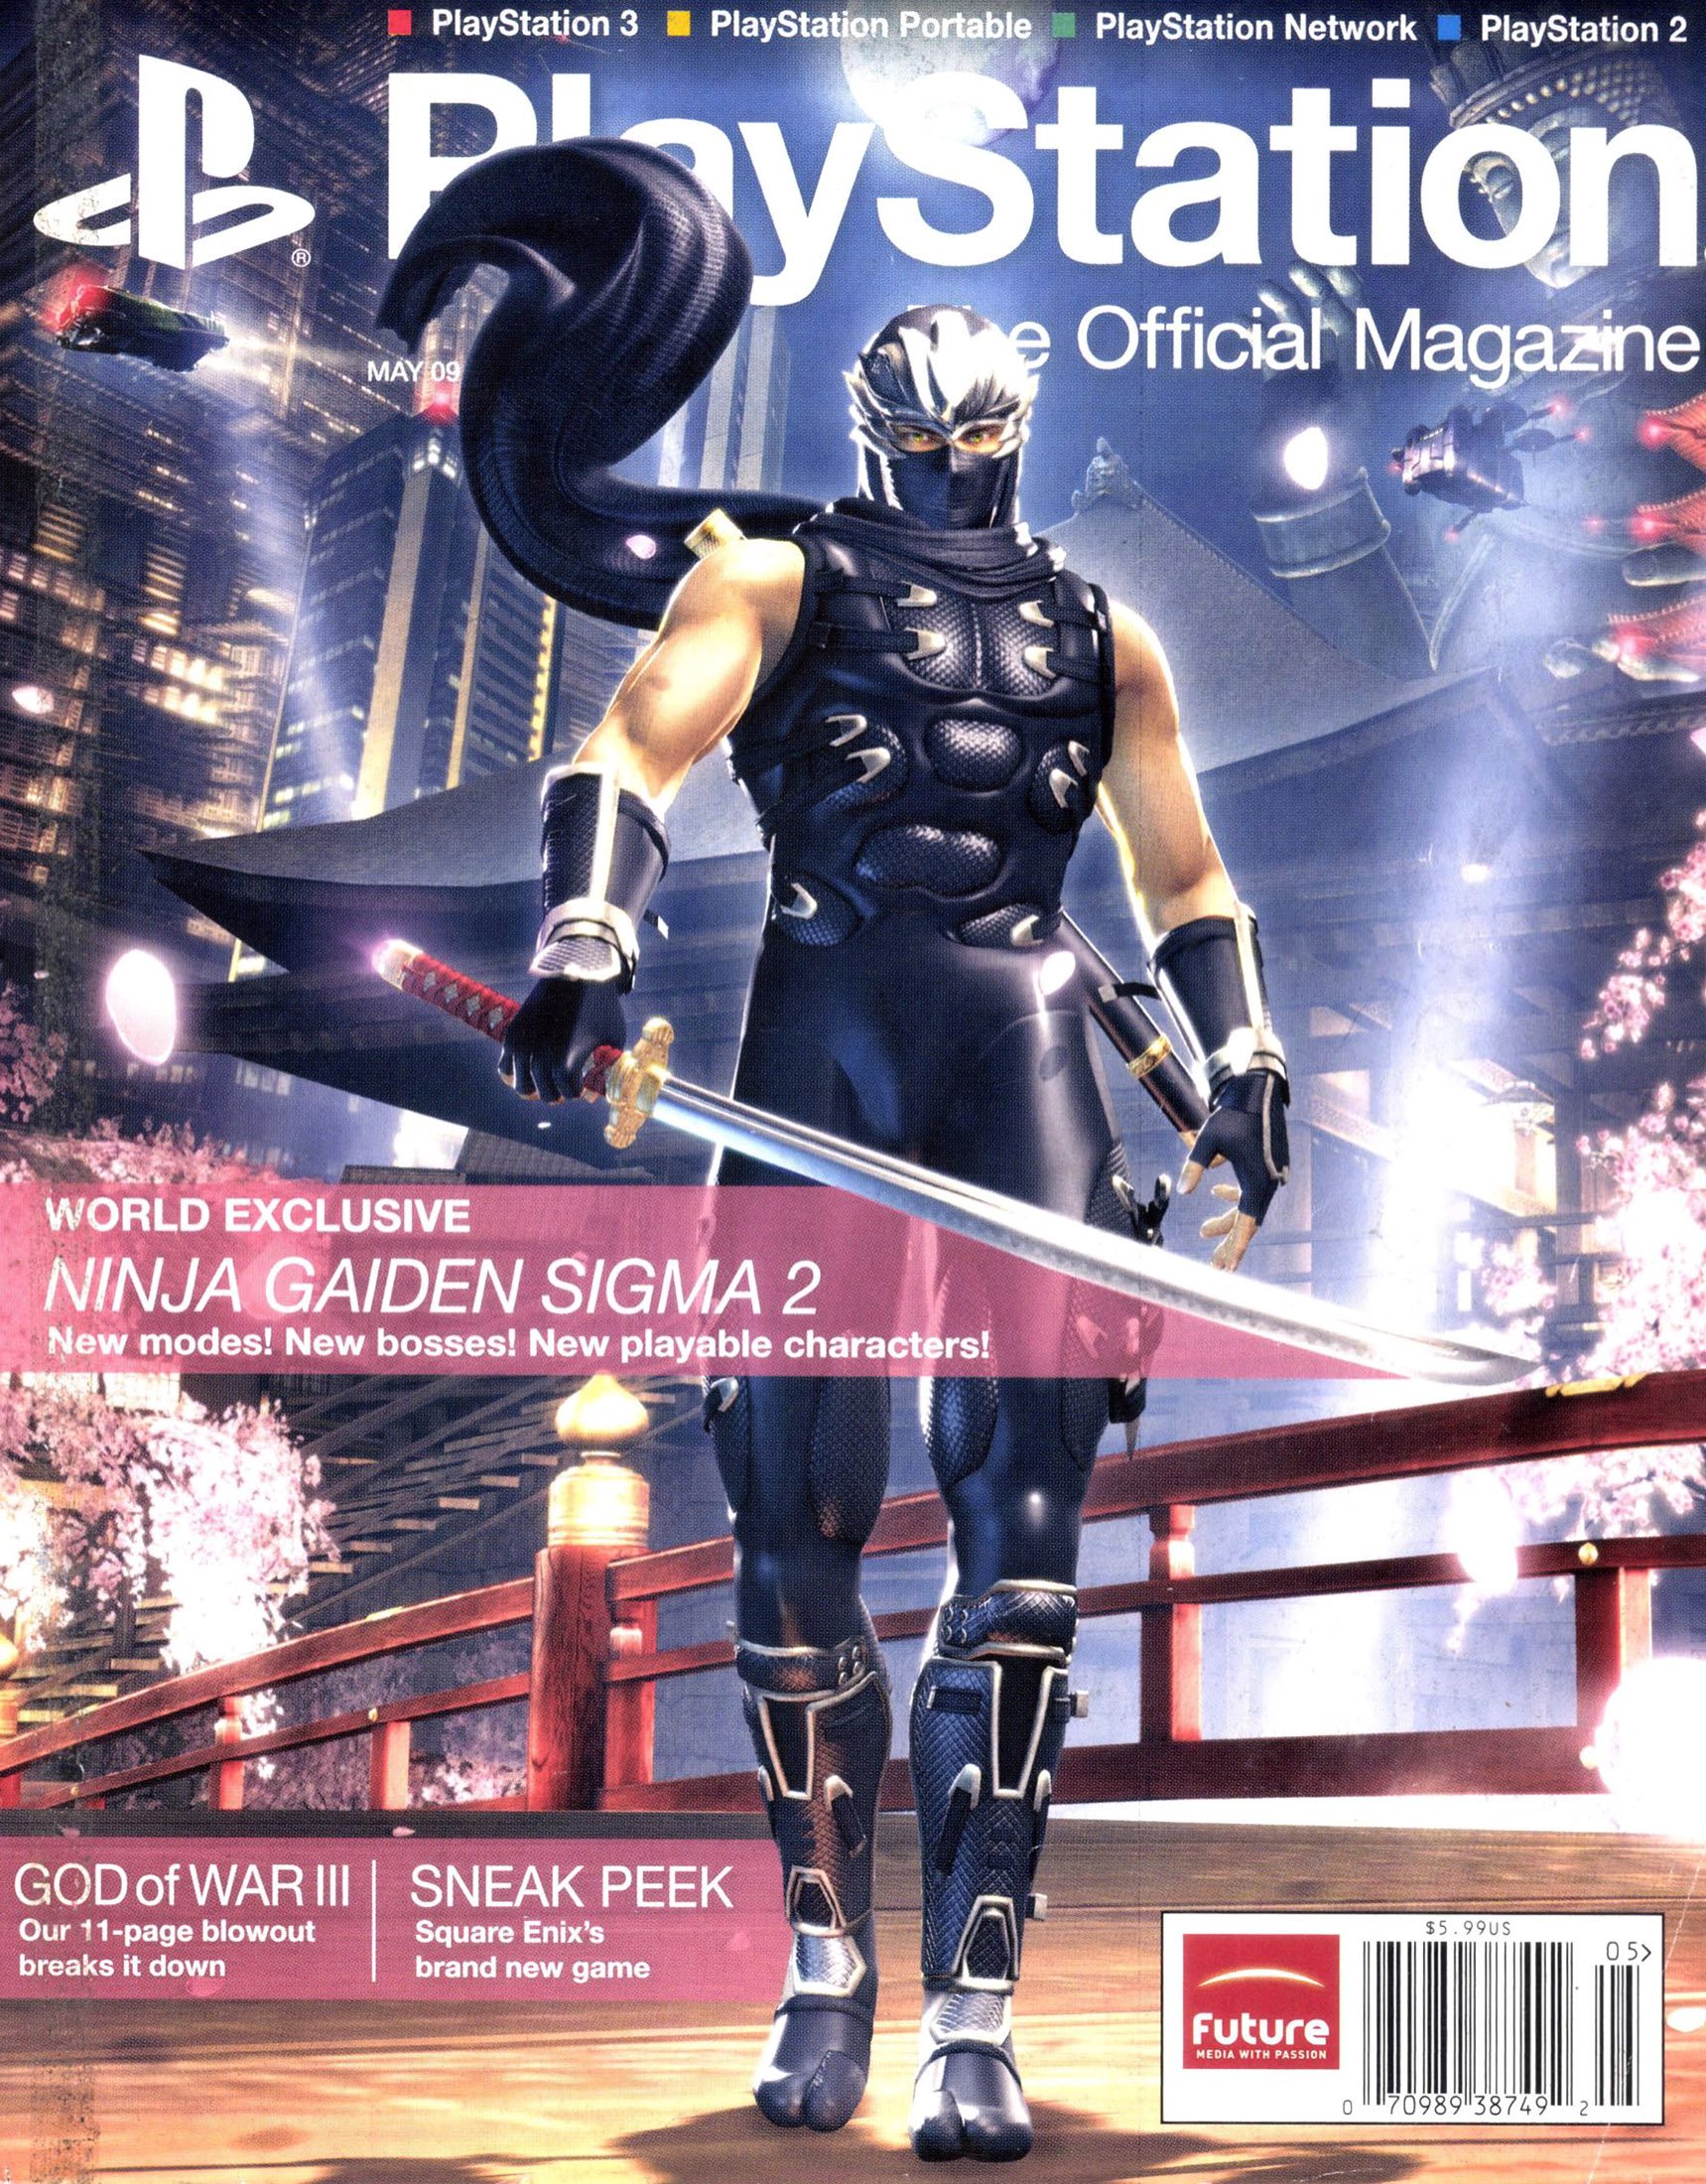 Playstation: The Official Magazine Issue 19 (May 2009)